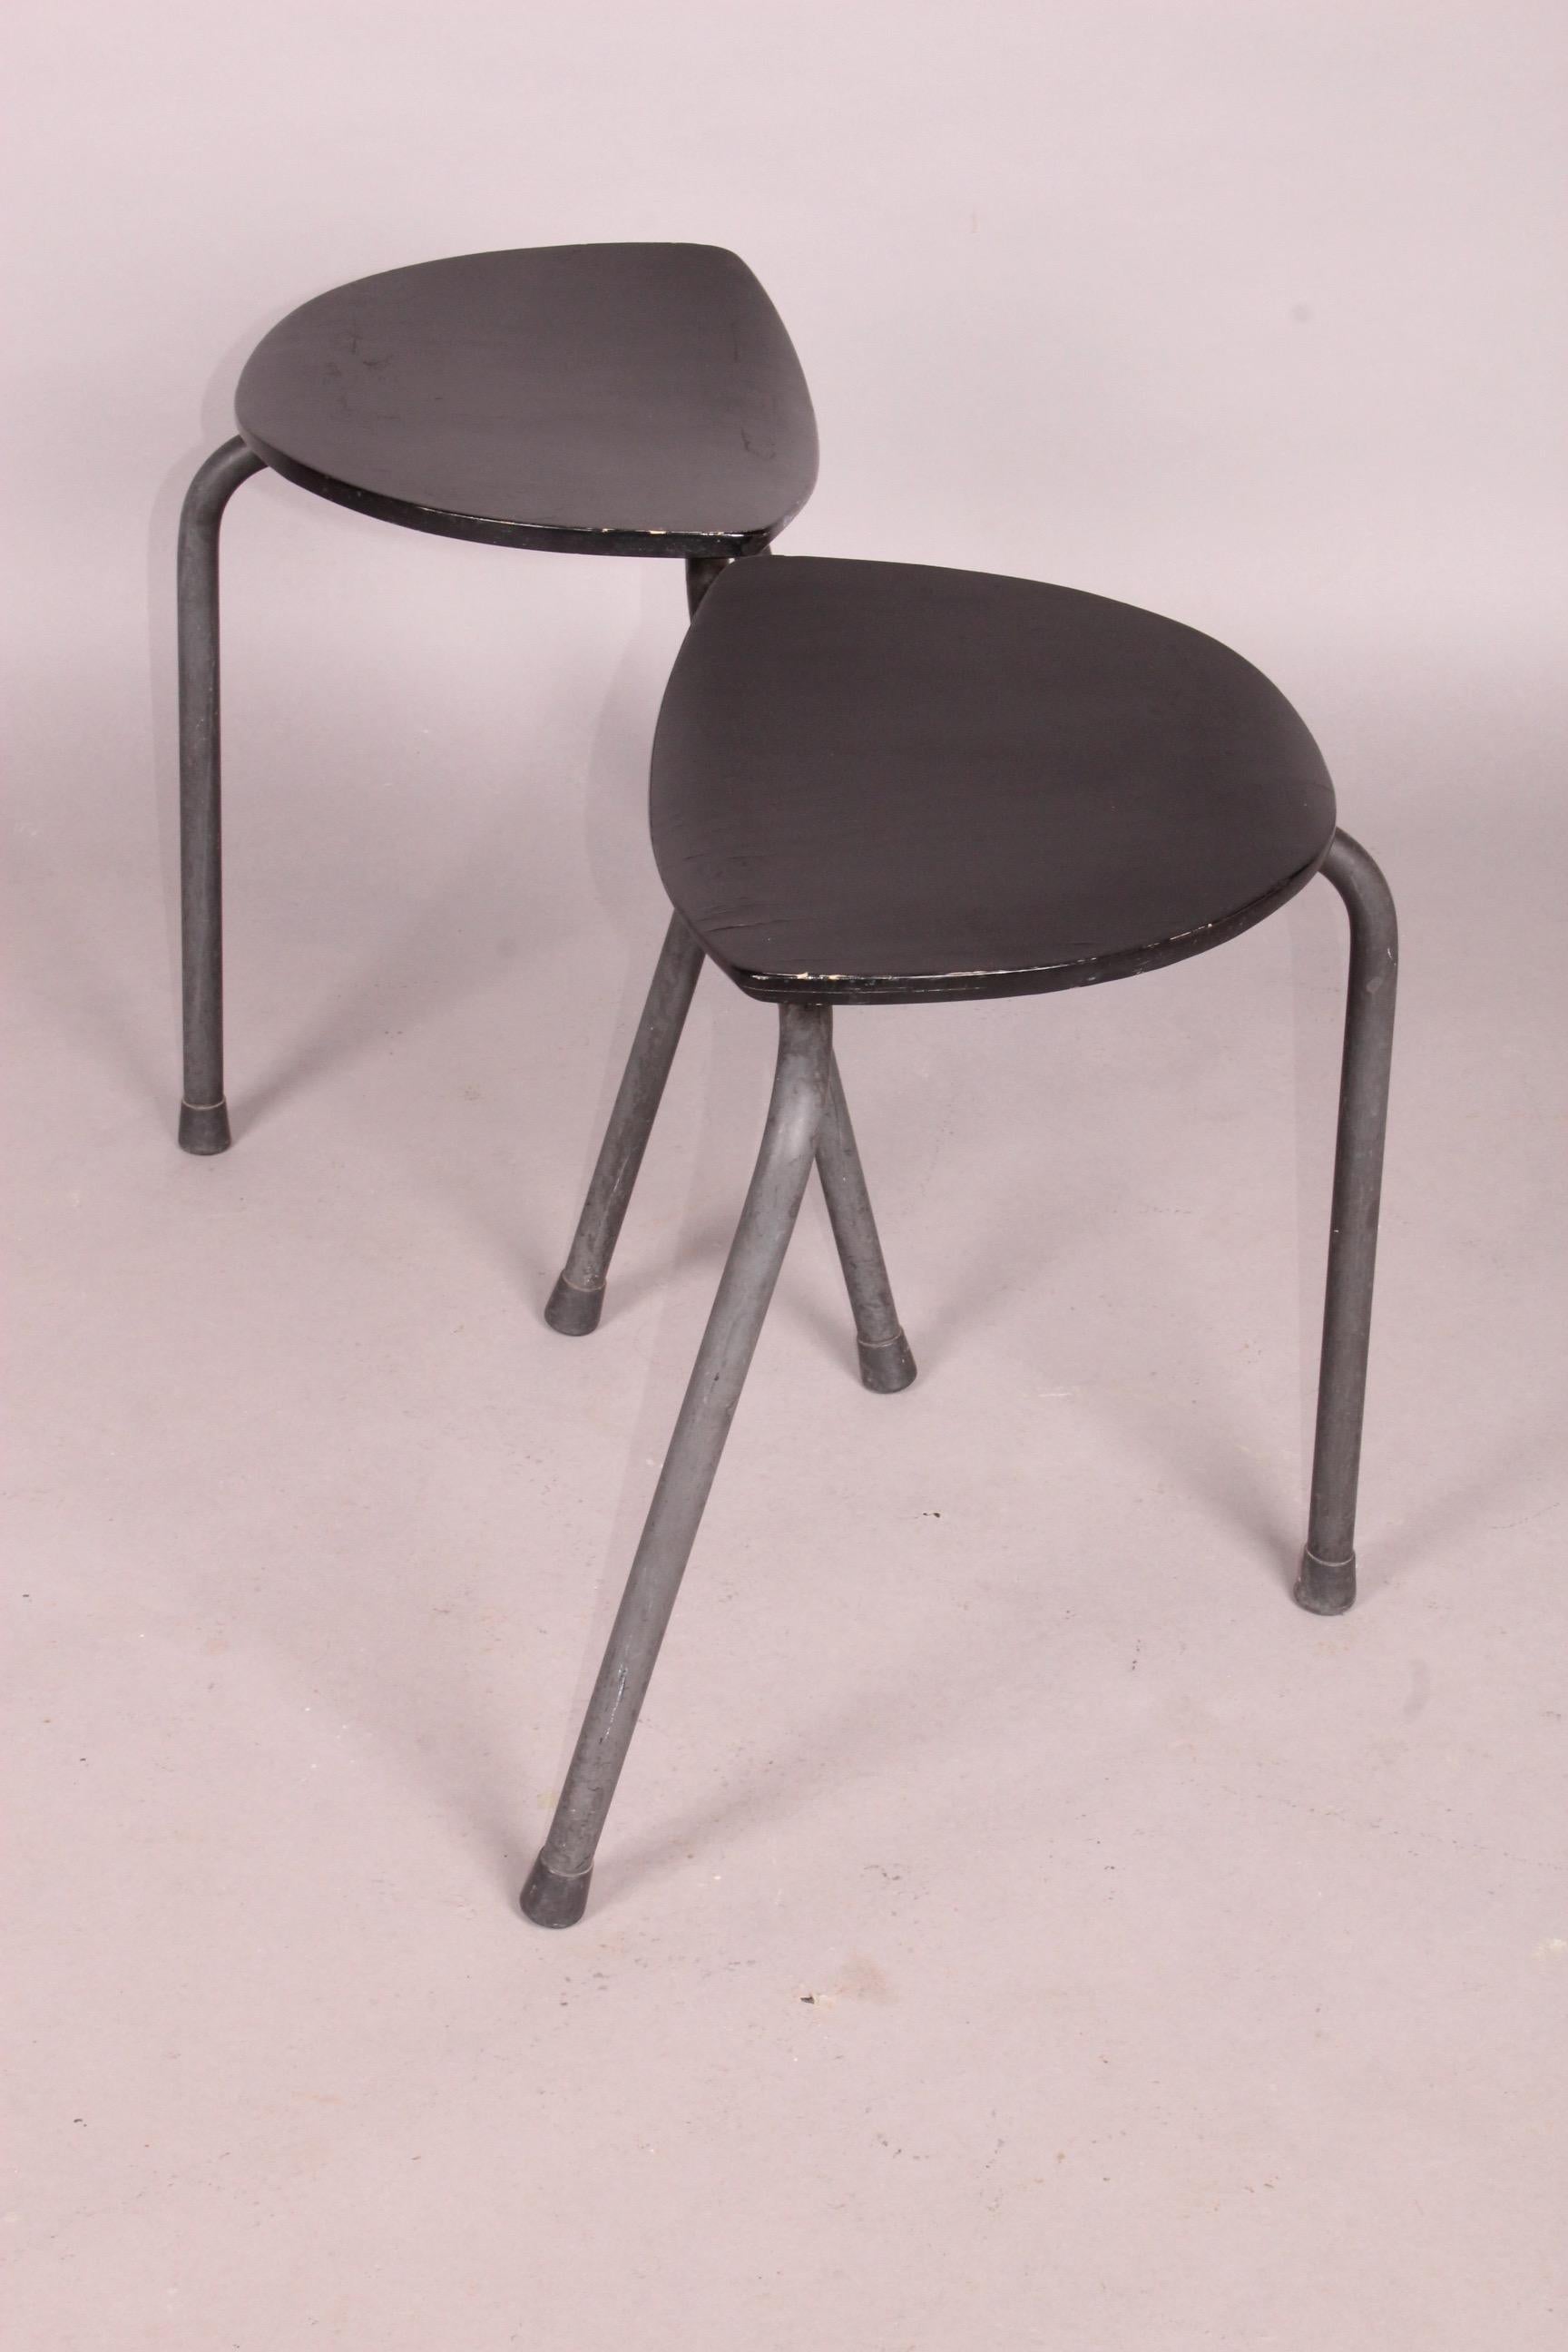 Pair of tripode stools, scratch on the top.